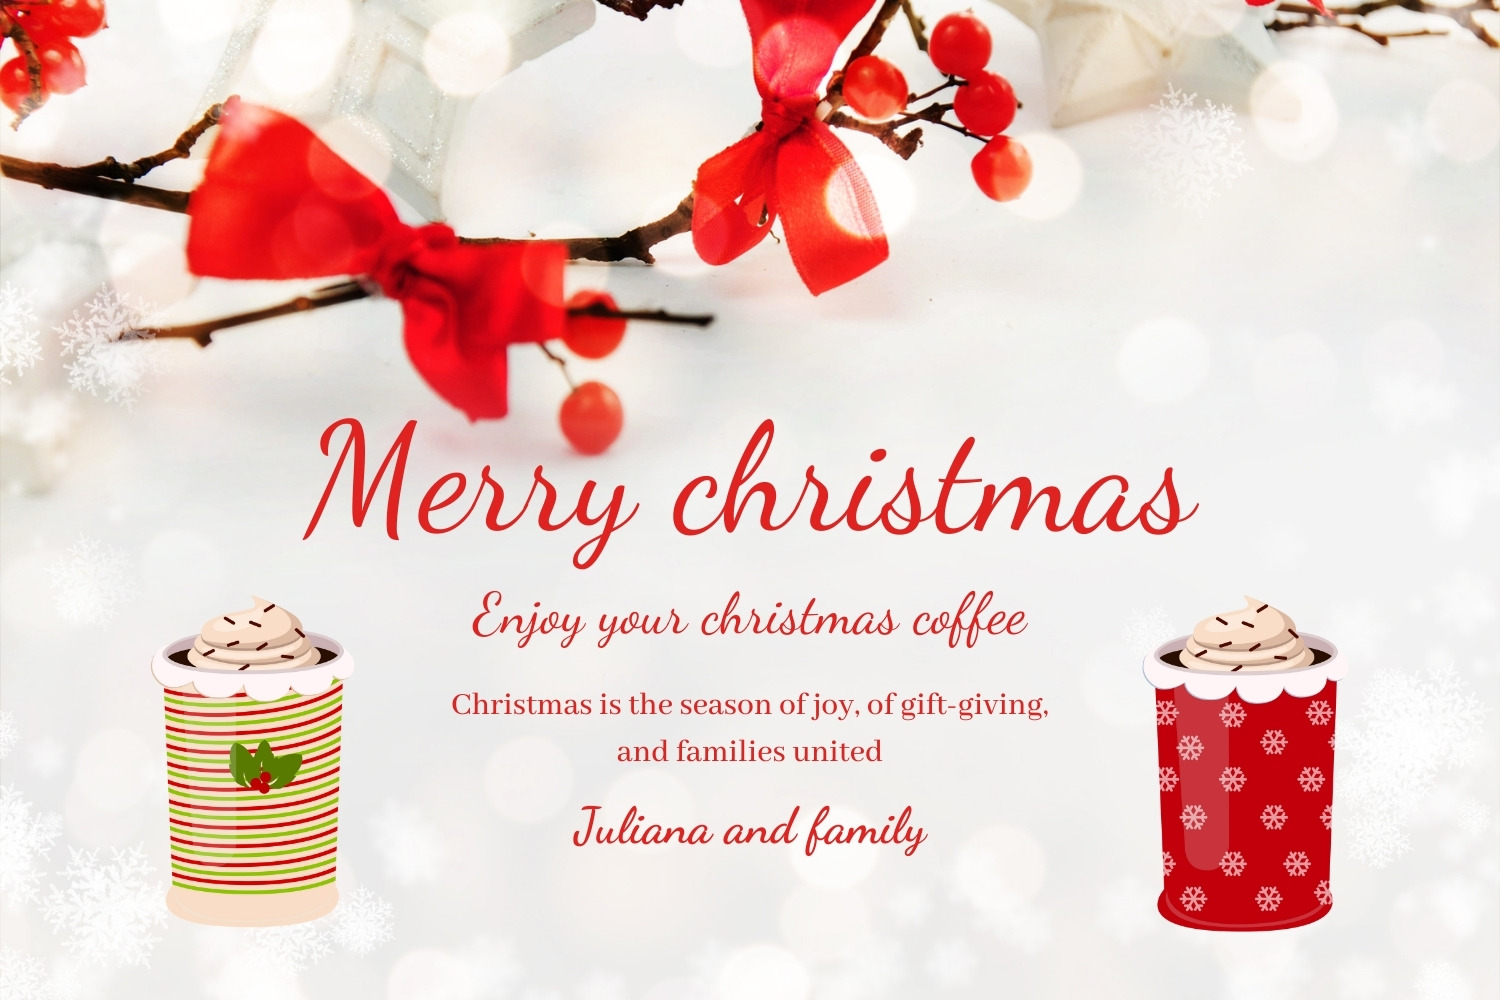 Enjoy Your Christmas Coffee Preview image.